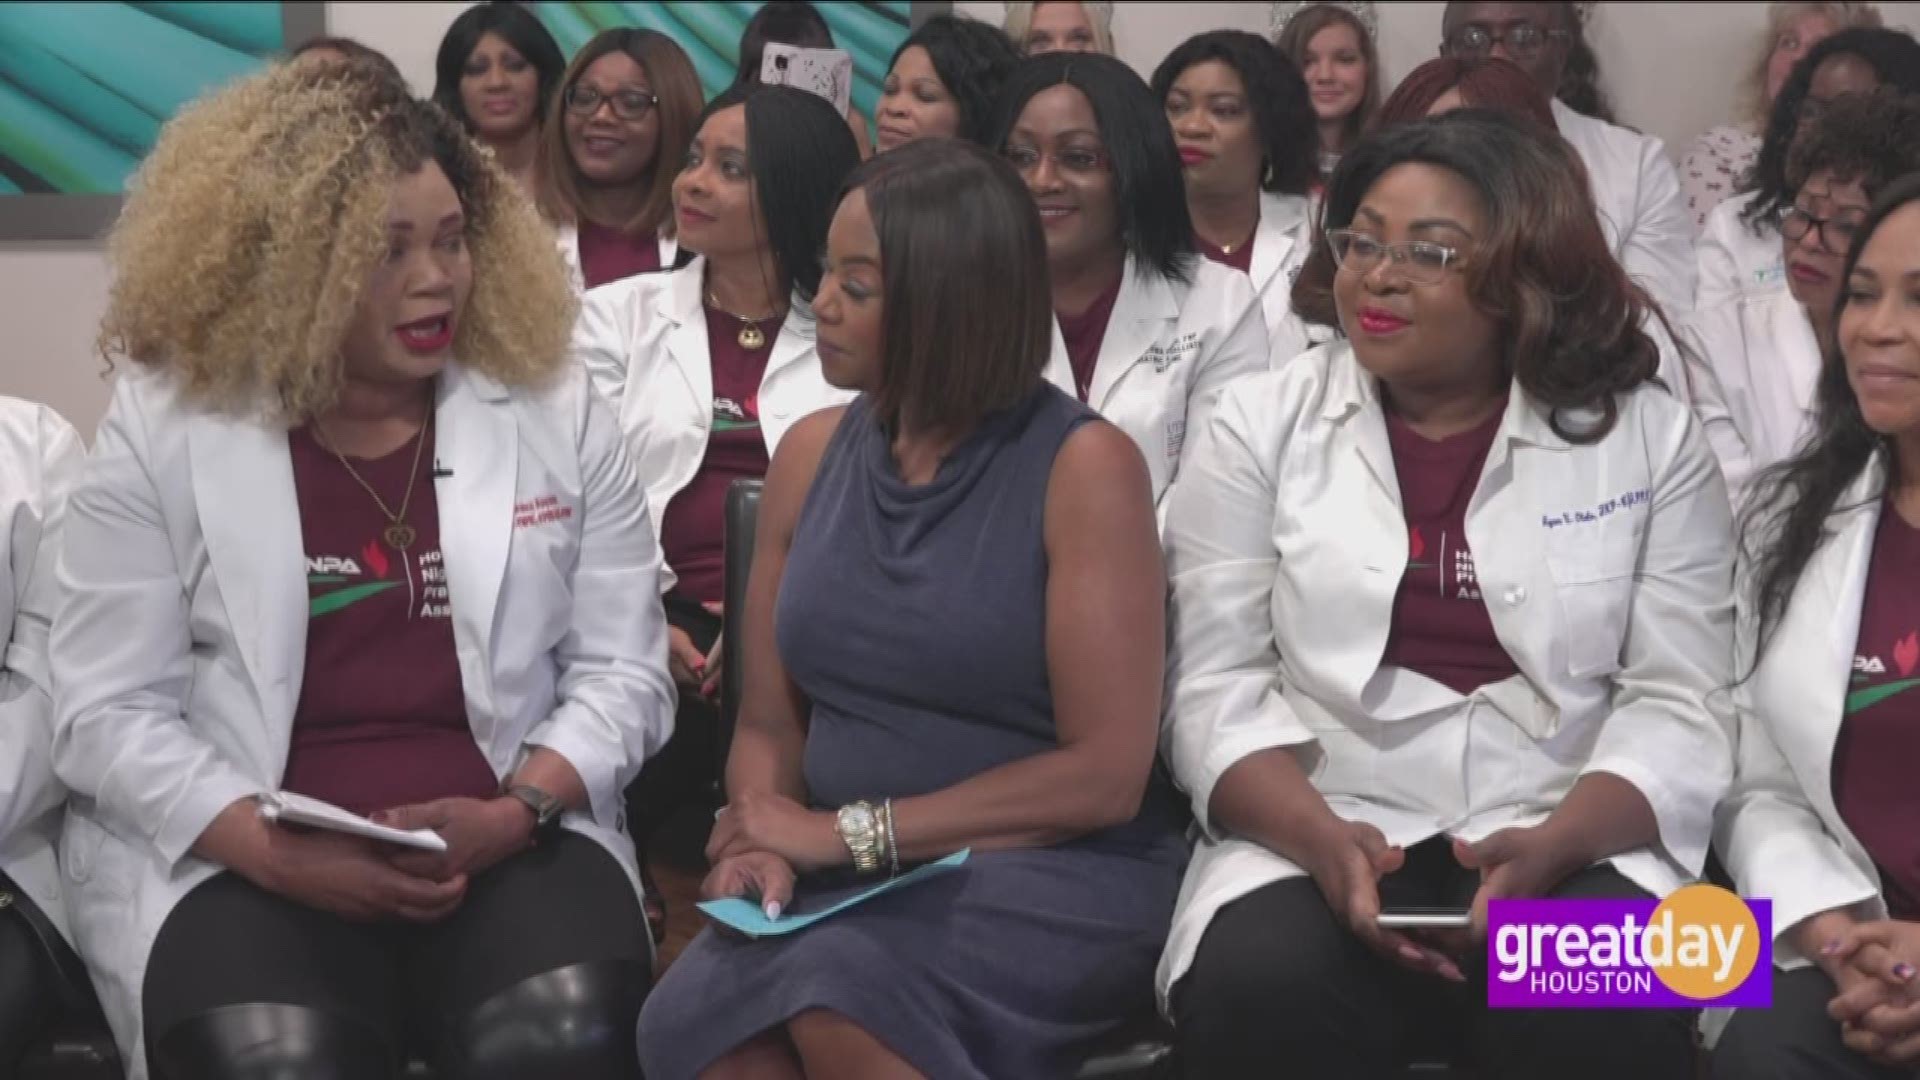 Members of the Houston Area Nigerian Nurse Practitioners Association joined the Great Day Houston live studio audience.